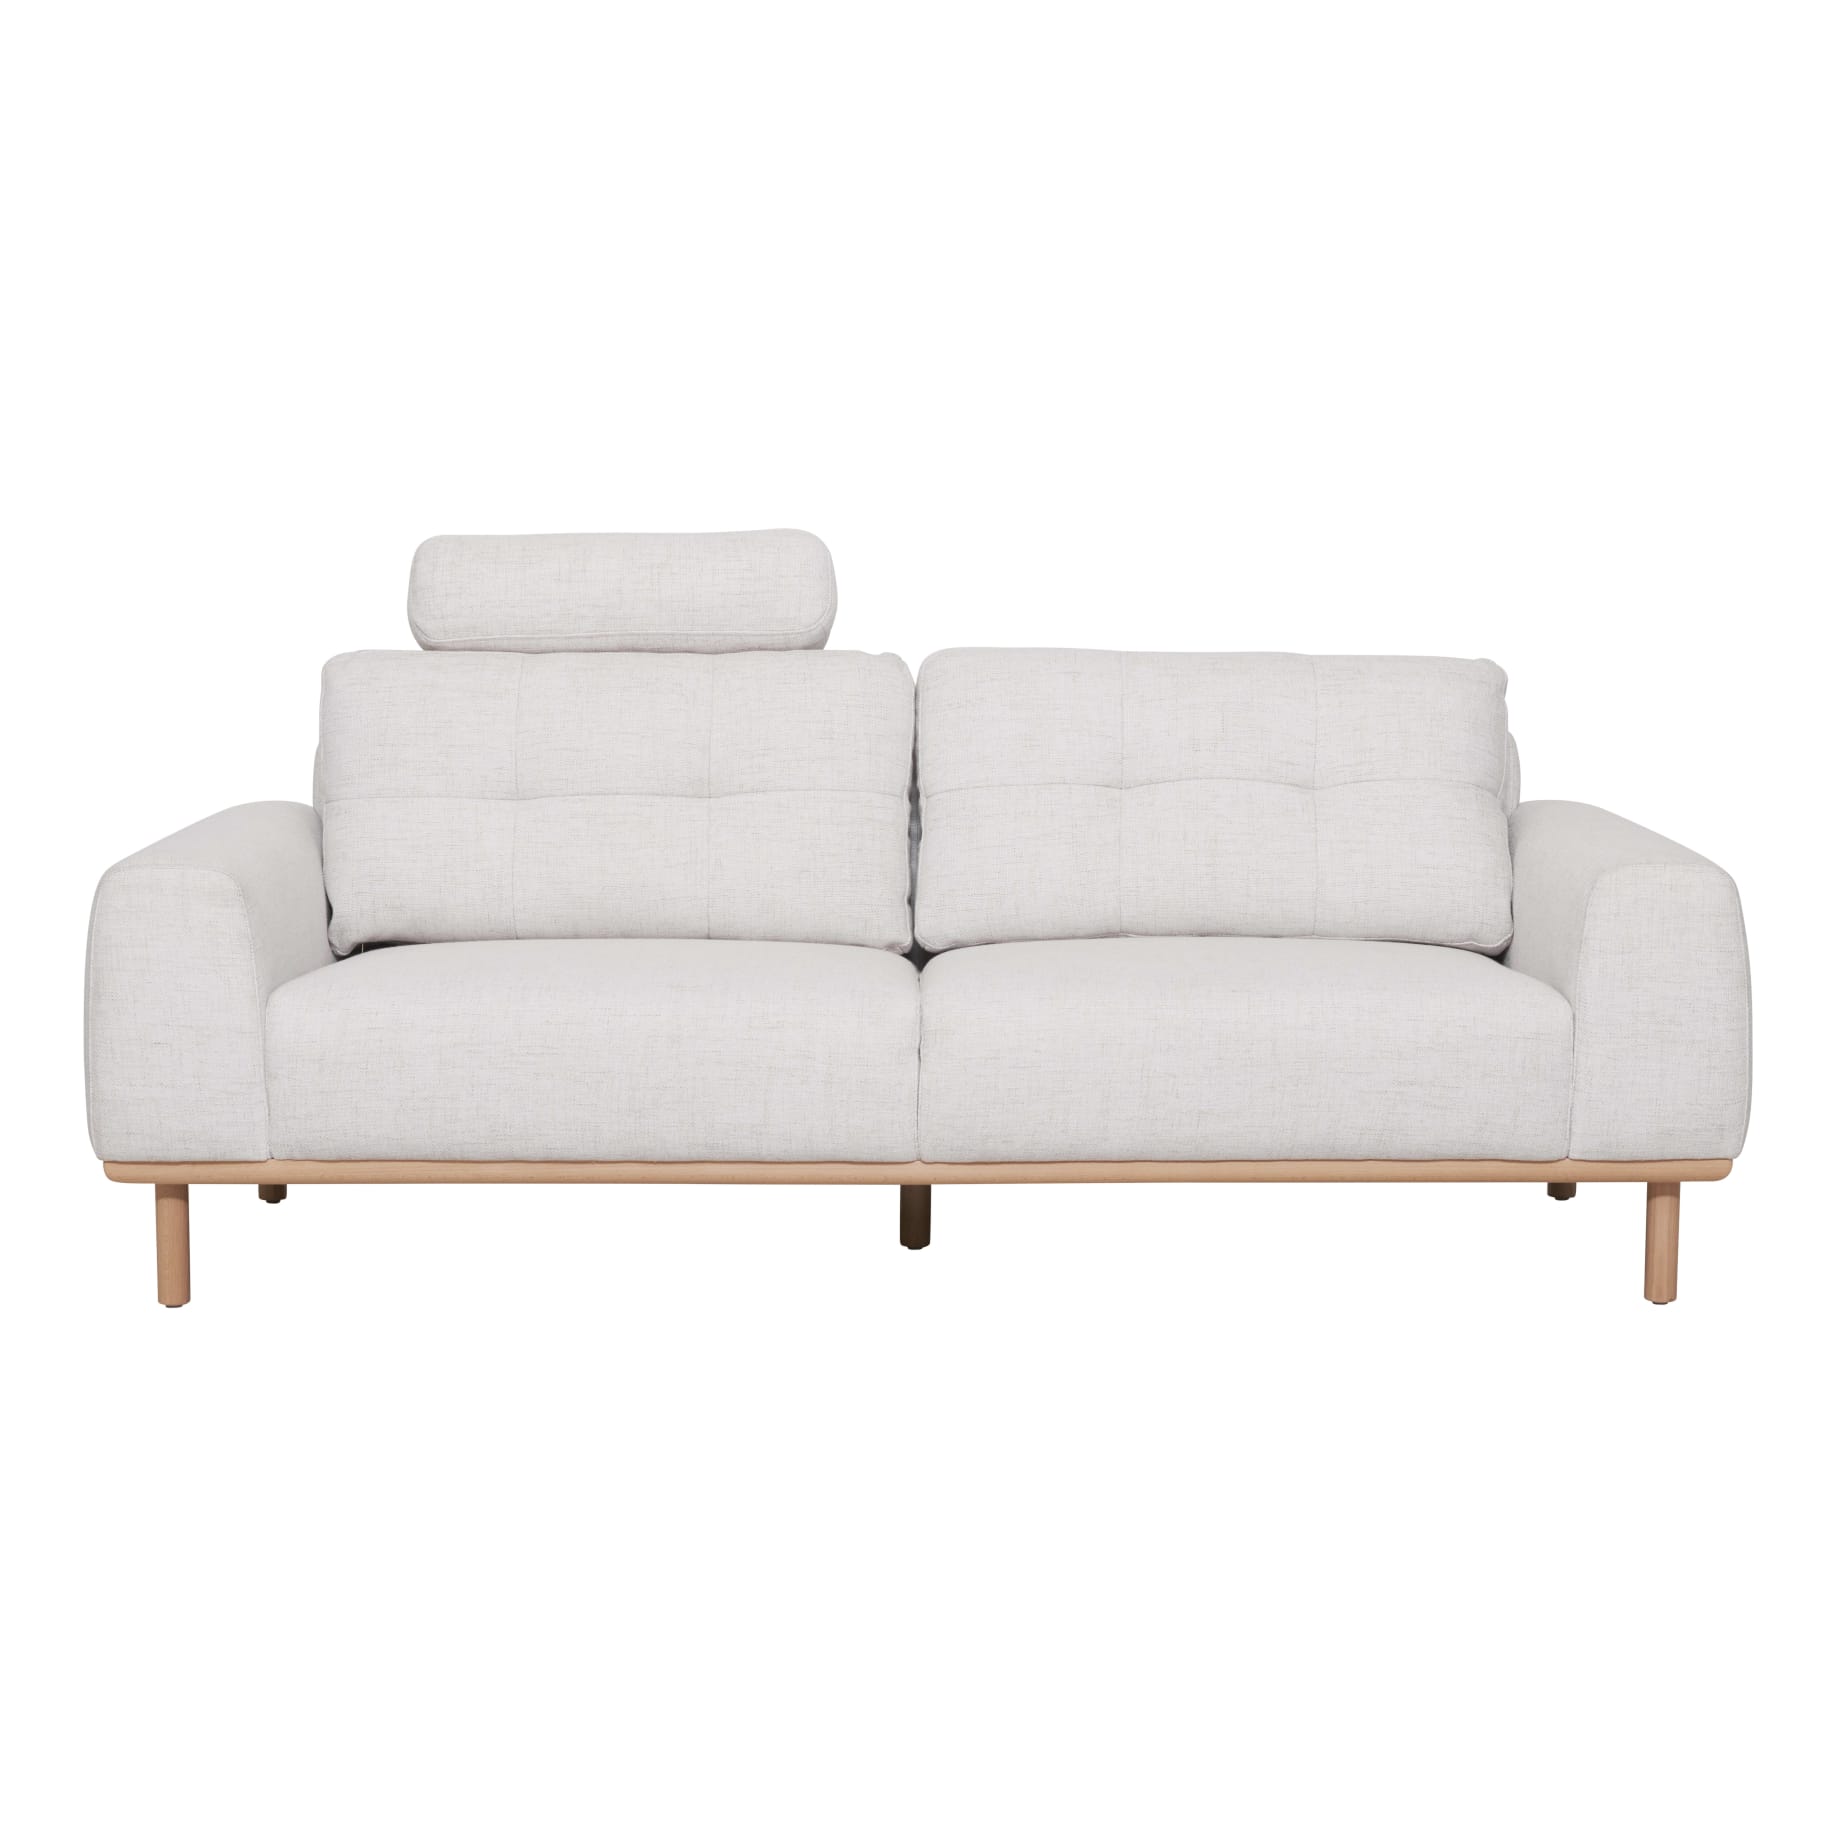 Stratton 3 Seater in Cloud White Sand